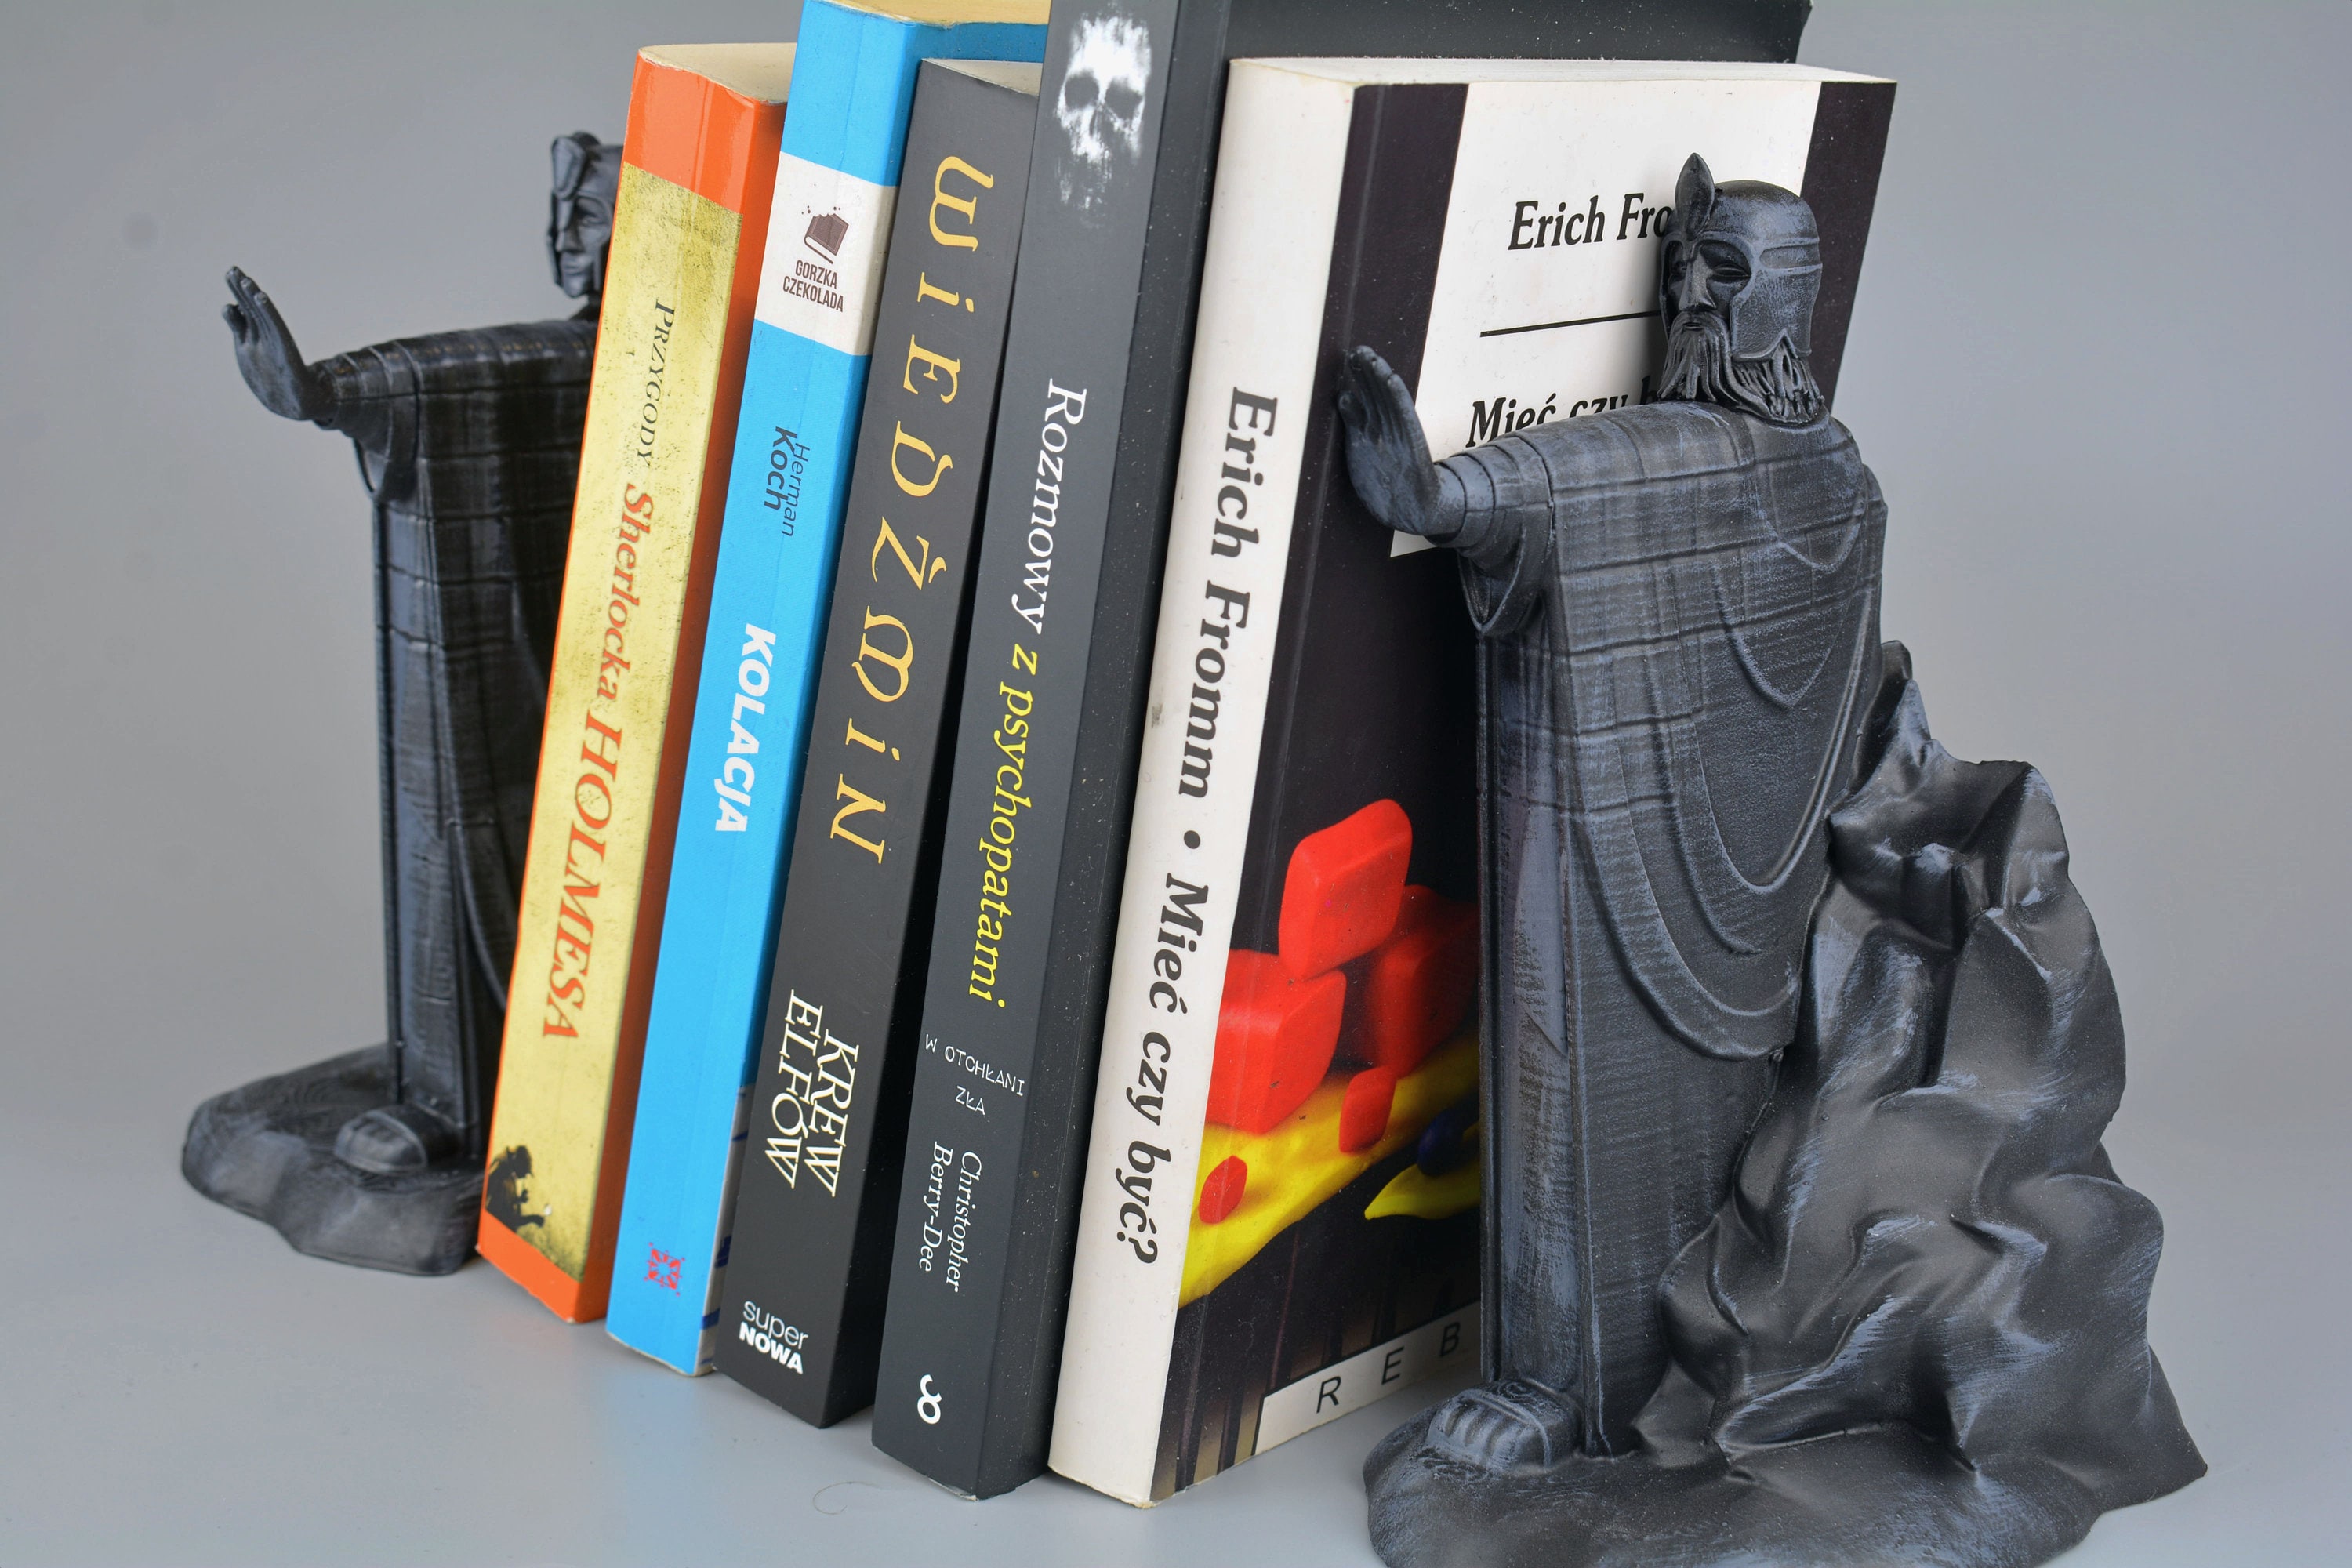 Buy Anime Bookends Online In India  Etsy India